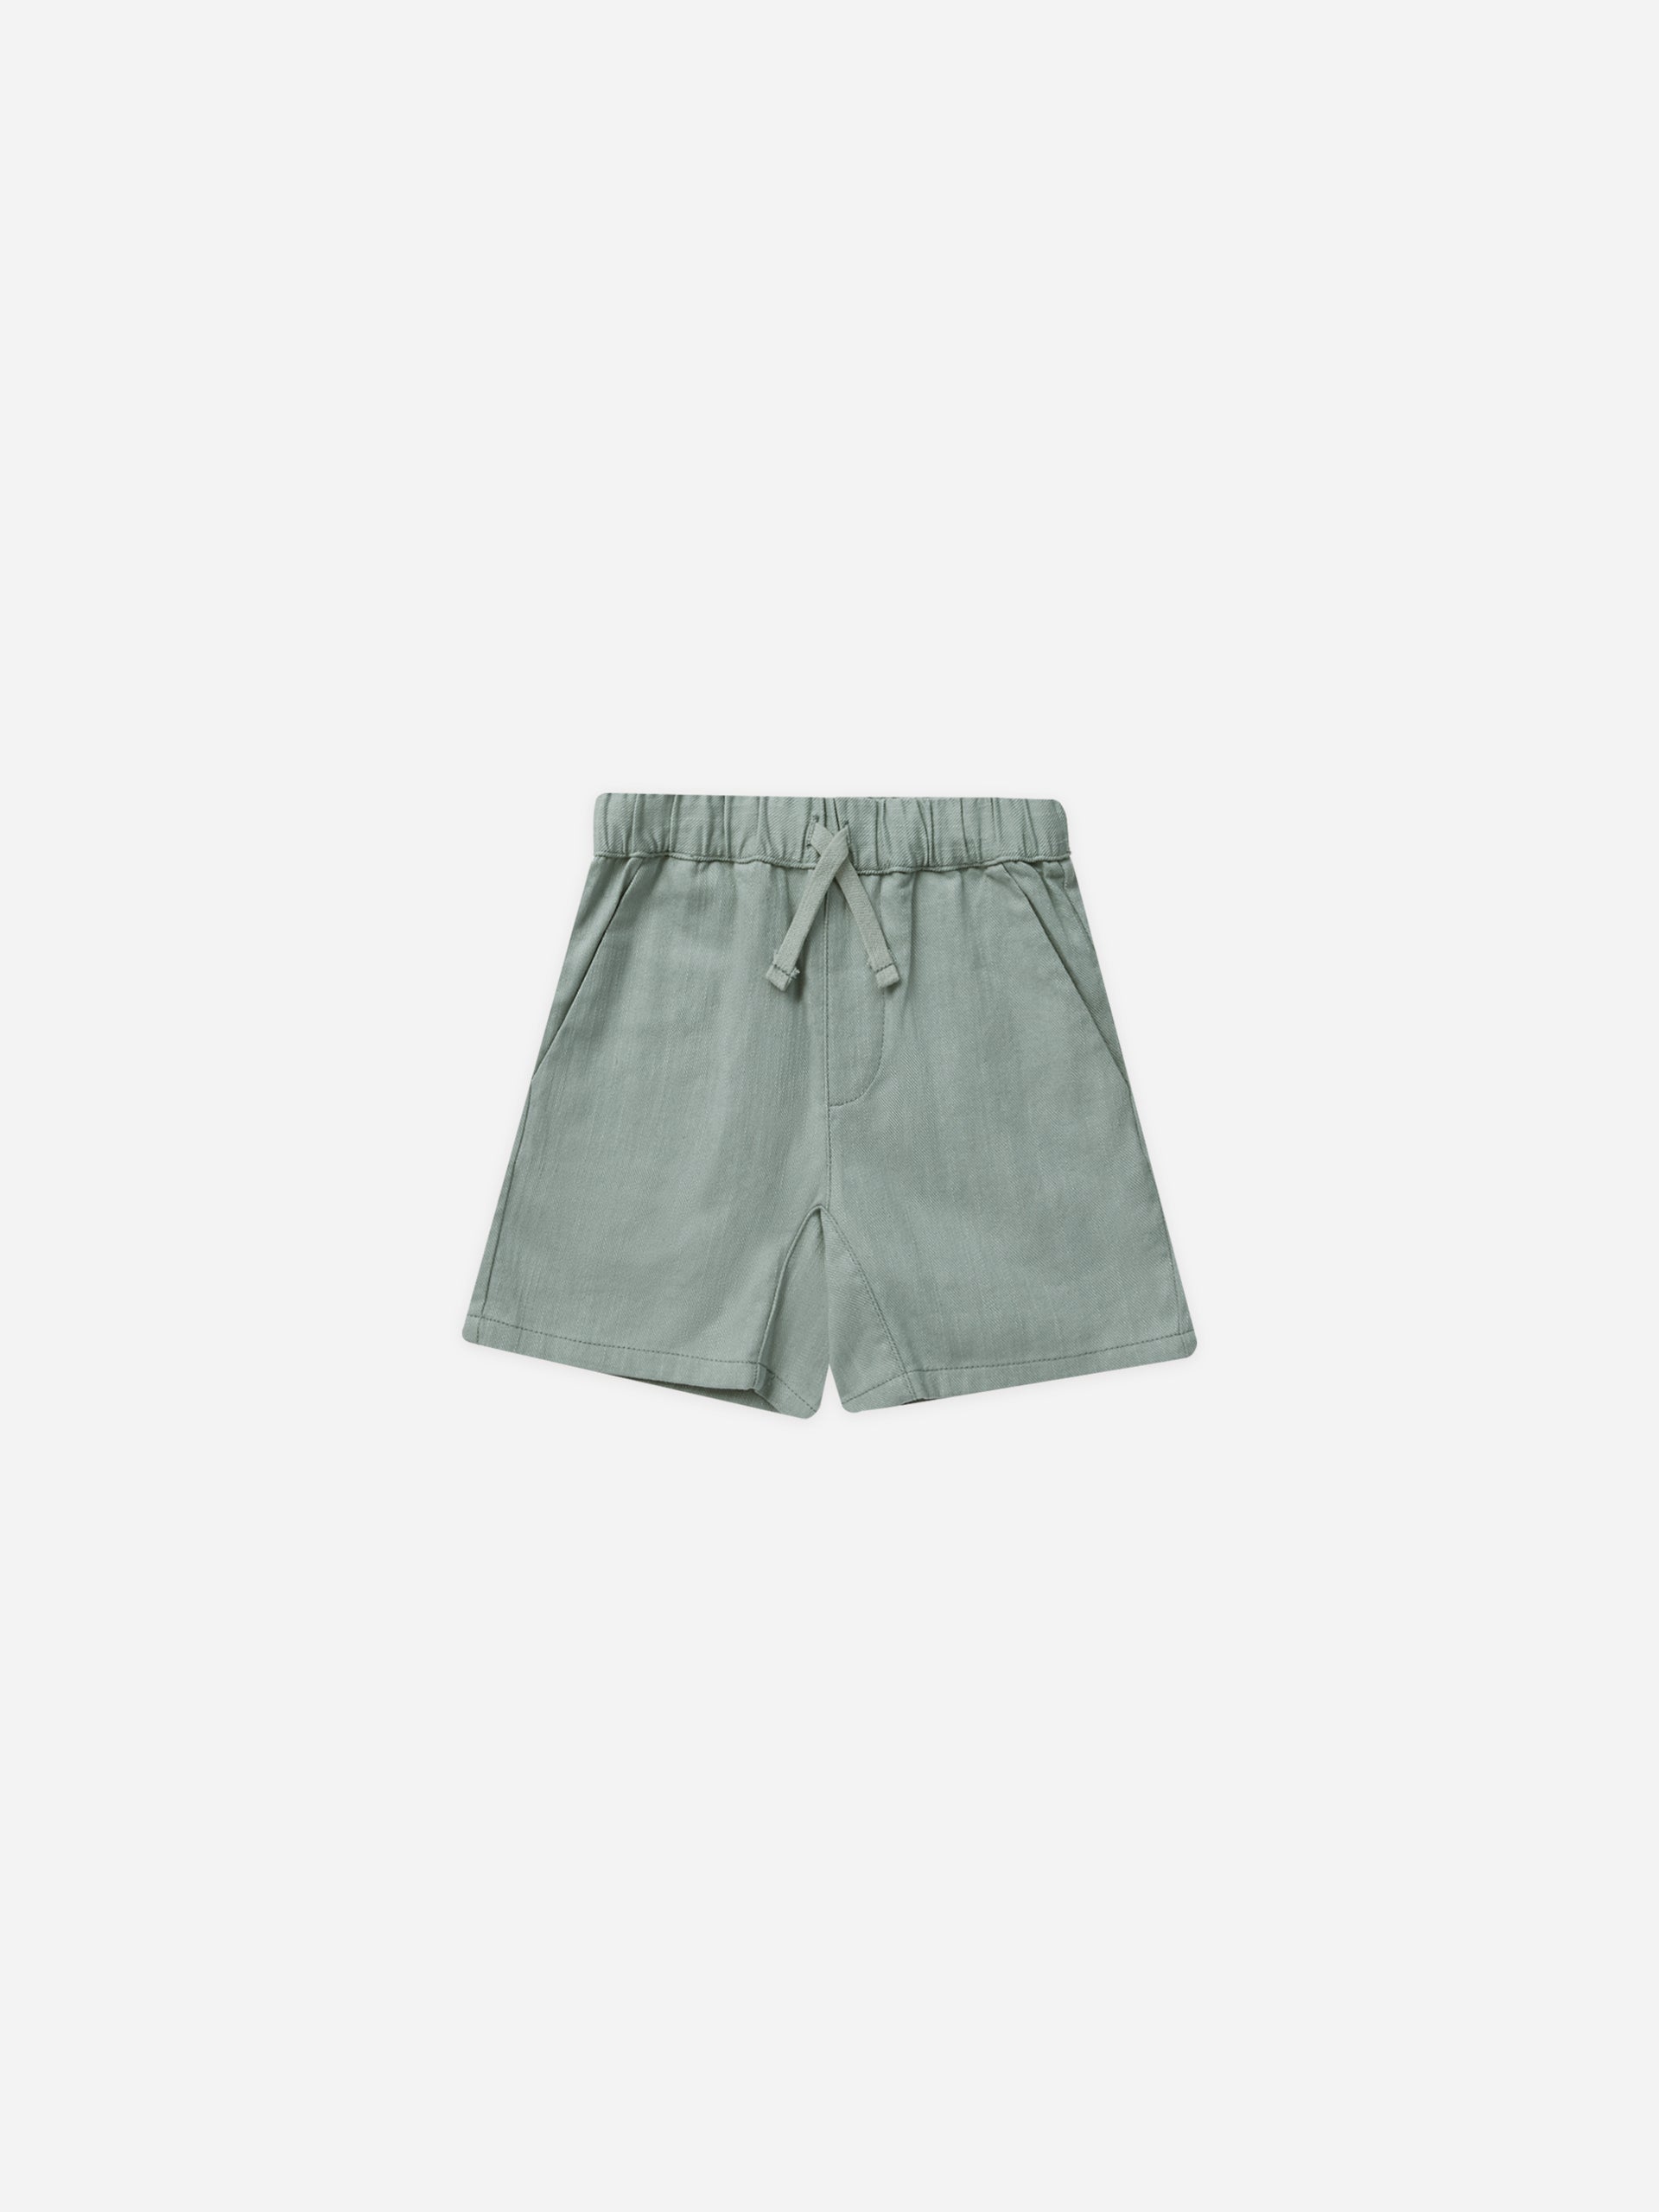 Bermuda Short || Aqua - Rylee + Cru | Kids Clothes | Trendy Baby Clothes | Modern Infant Outfits |